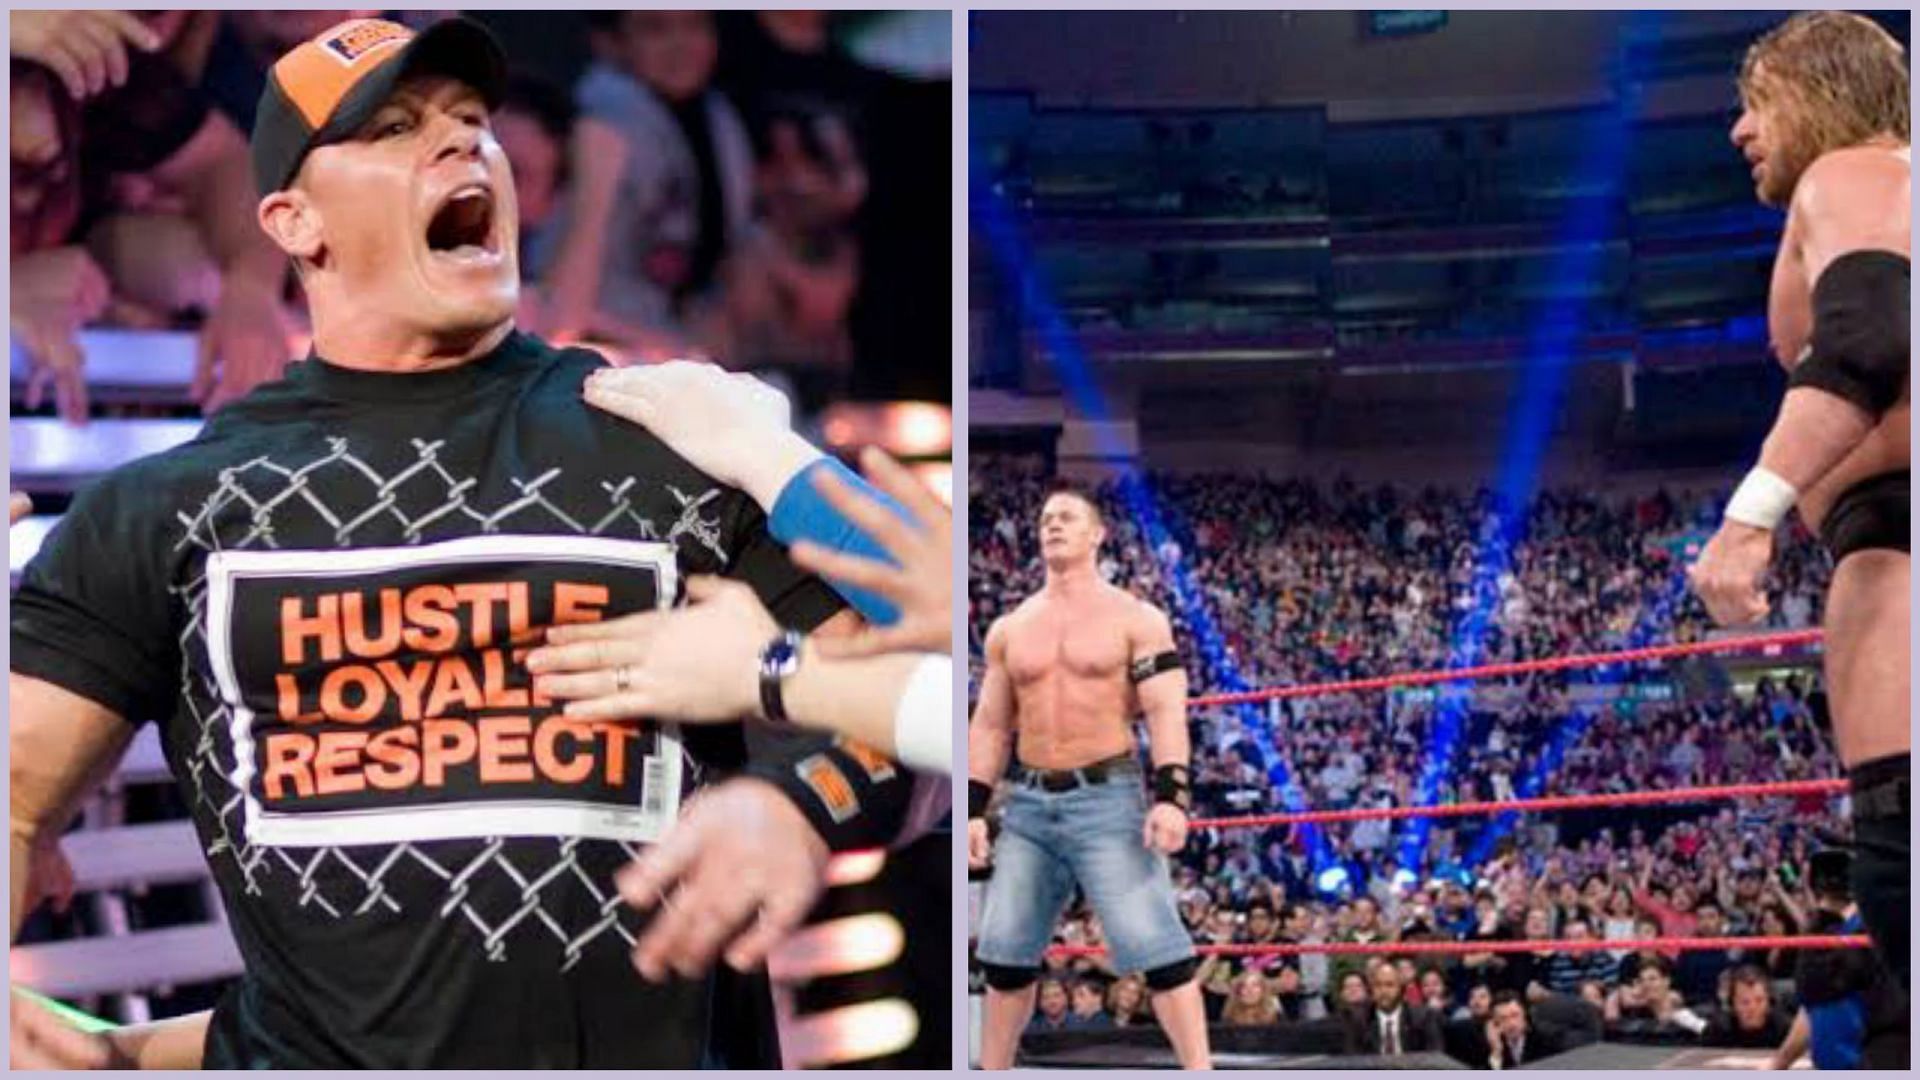 These 3 WWE superstars won the Royal Rumble match after entering at number 30